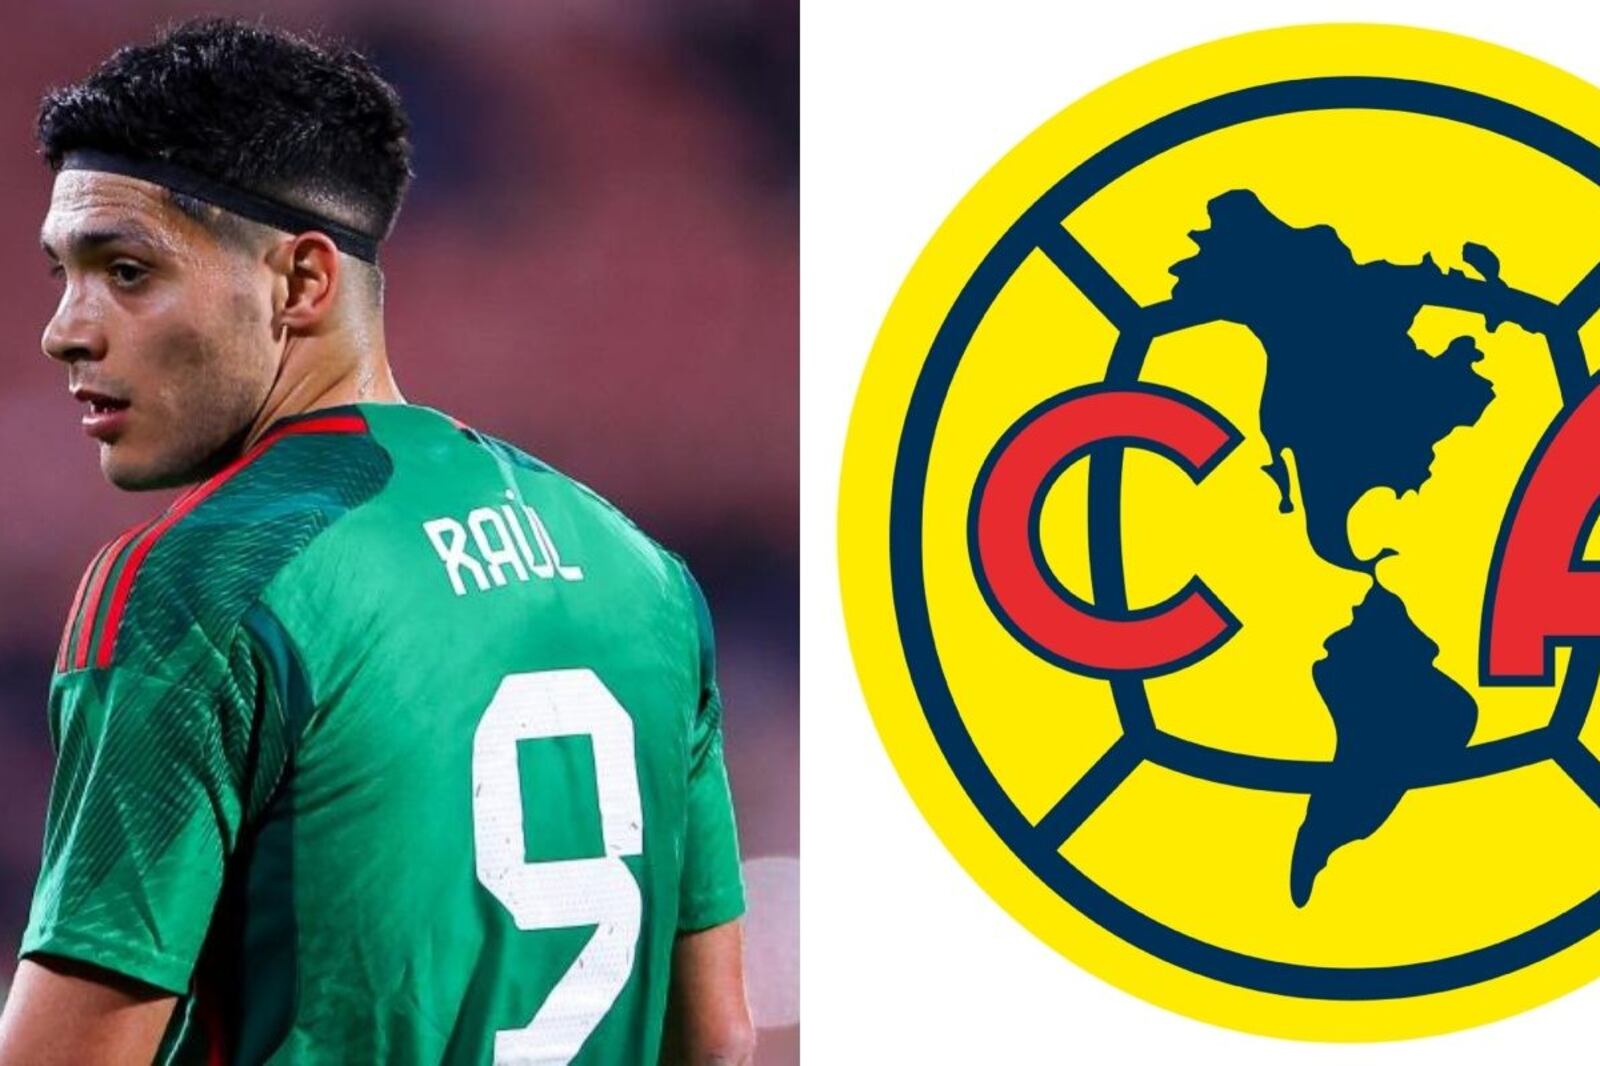 The decision that América made with Raúl Jiménez after his goal with the National Team